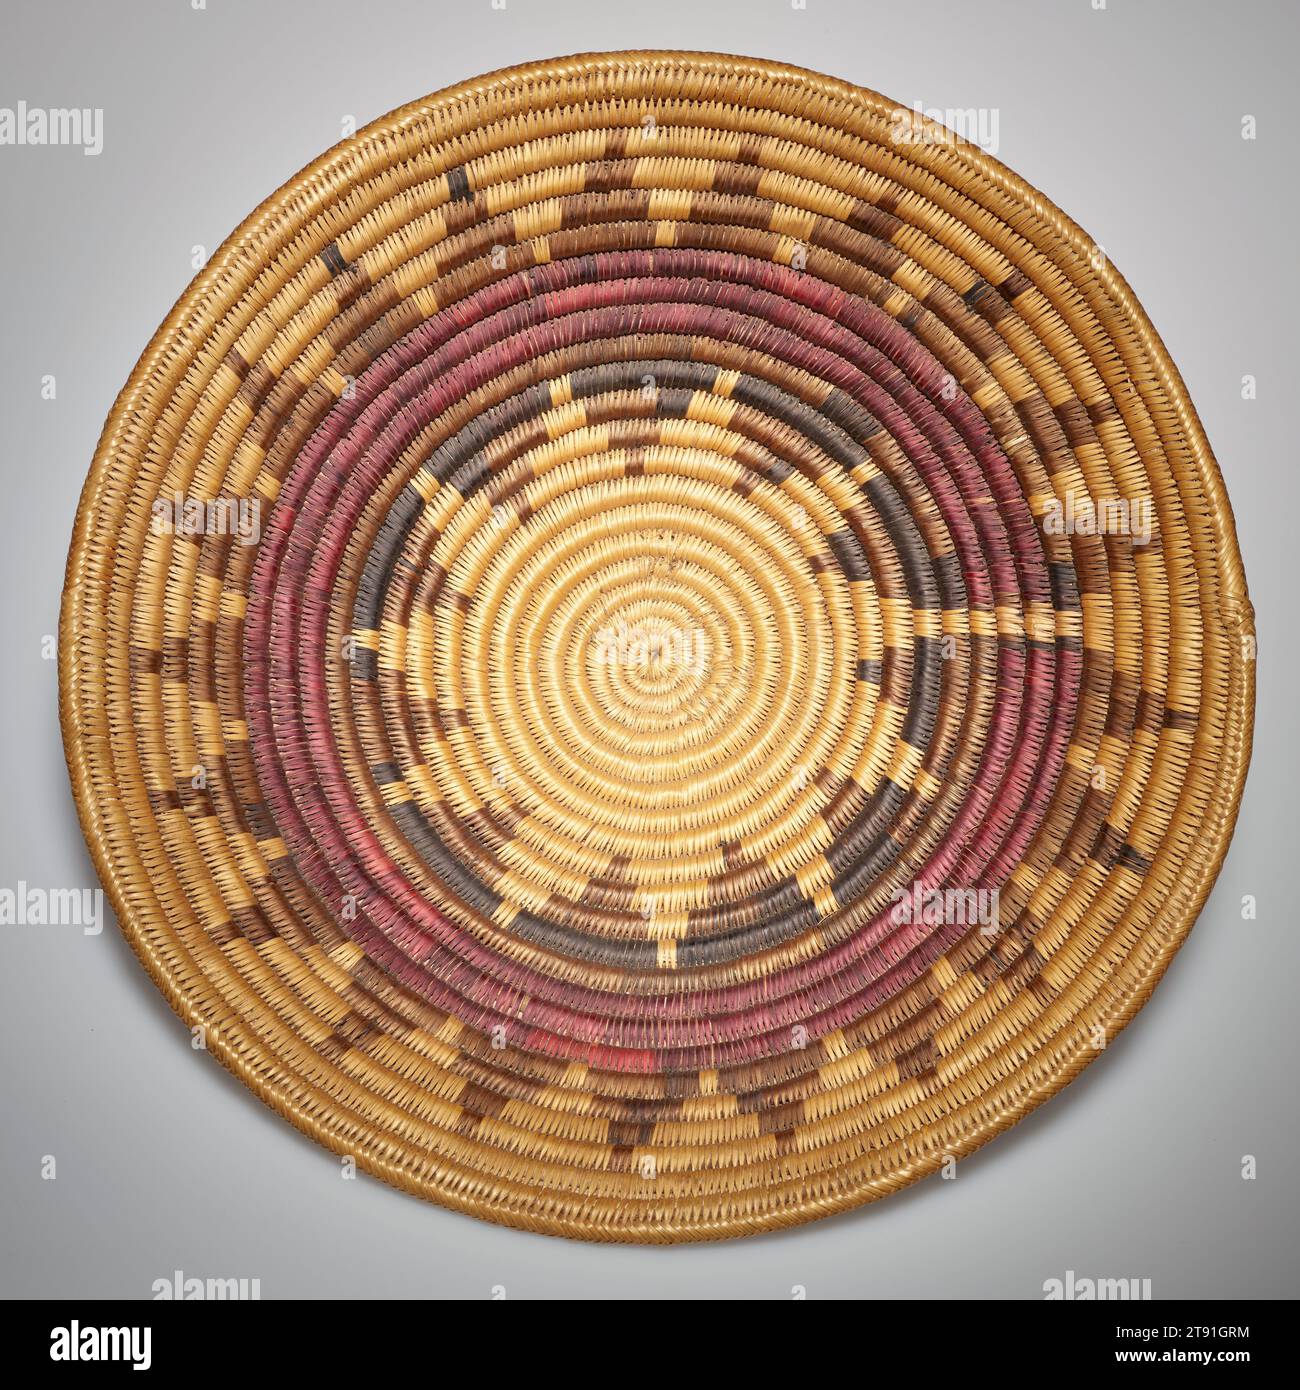 Basket, early 20th century, 16 1/4 x 16 1/4 in. (41.28 x 41.28 cm), Plant fibers, United States, 20th century, Although making baskets is not a vital role of Diné culture, baskets serve many important functions in their ceremonies. The Utes and Southern Paiutes, for example, have made wedding baskets in great quantity for trade with the Diné since before 1890. They are shallow in form with radiating designs and are made from sumac. The colors and designs of these baskets have symbolic meaning. The center represents Diné ancestry and the beginning of life. Stock Photo